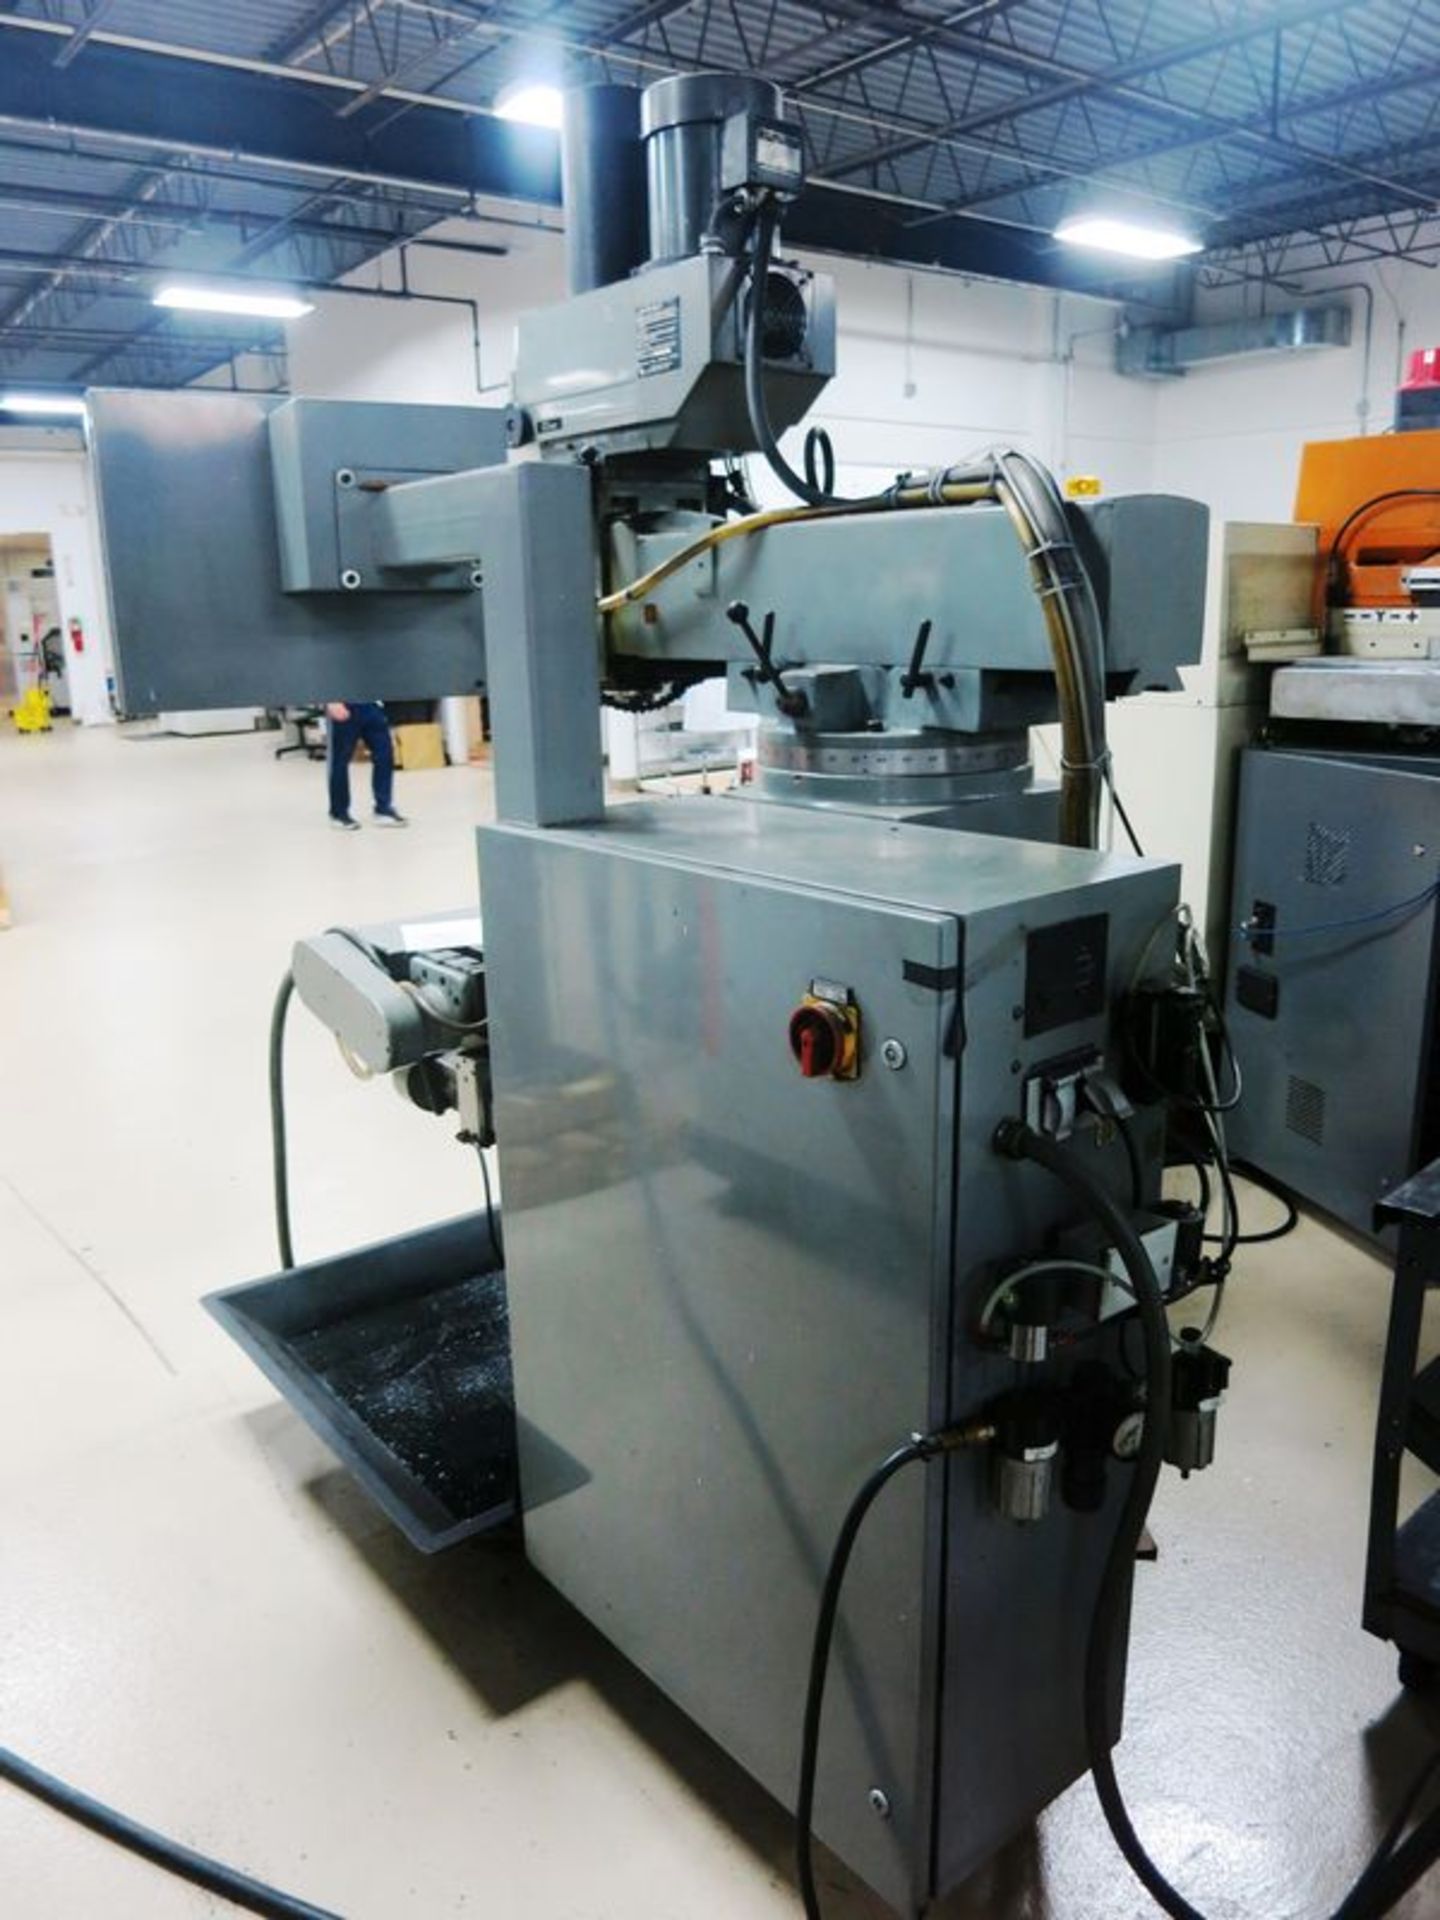 Supermax Model YCm-42 CNC Vertical Bed Mill Machine W/Delta Dynapath 3-Axis Control, S/N 005379 - Image 5 of 5